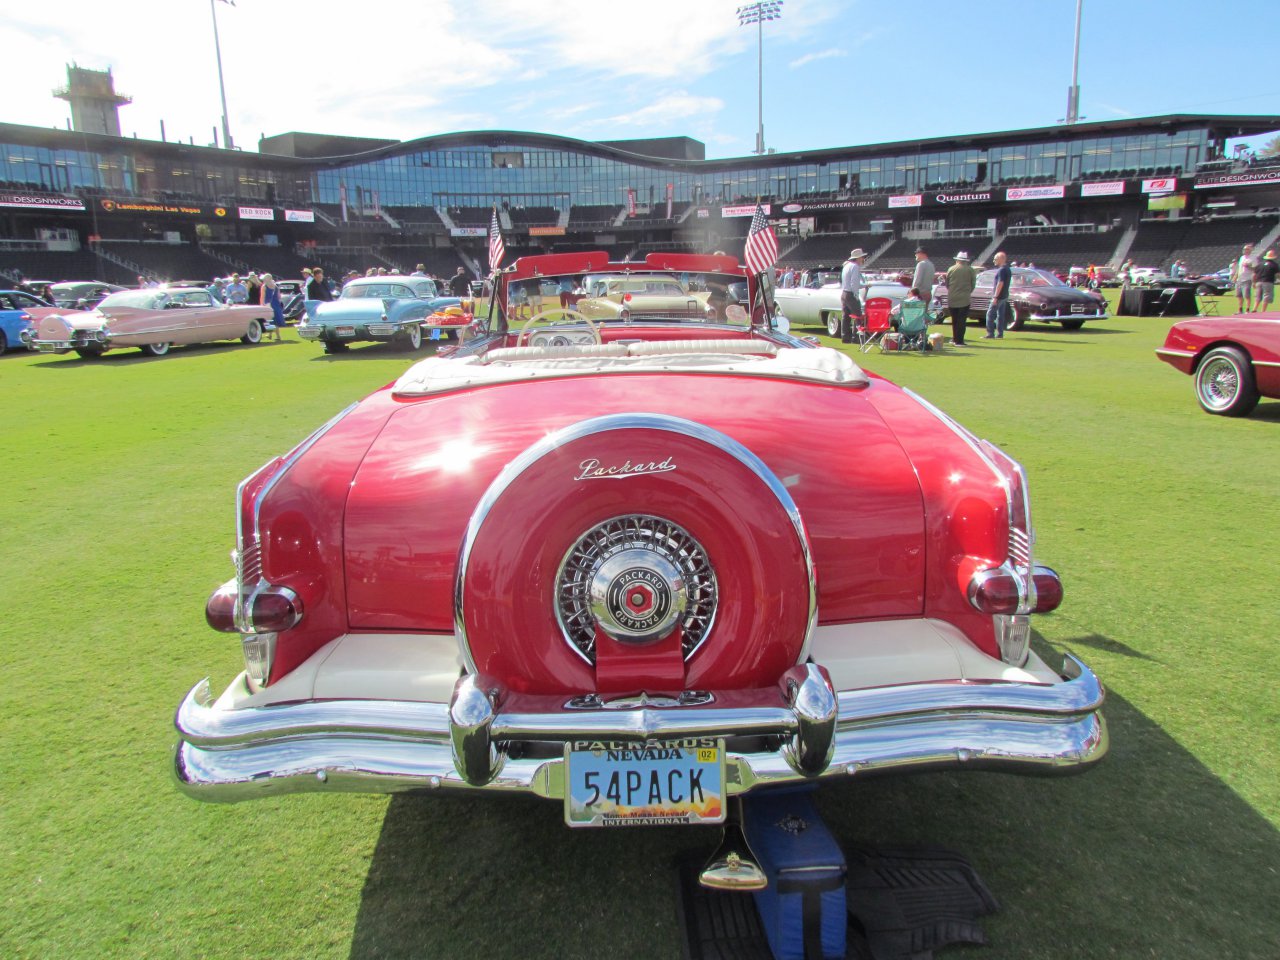 Las Vegas, Las Vegas hits a home run with concours in the ballpark, ClassicCars.com Journal